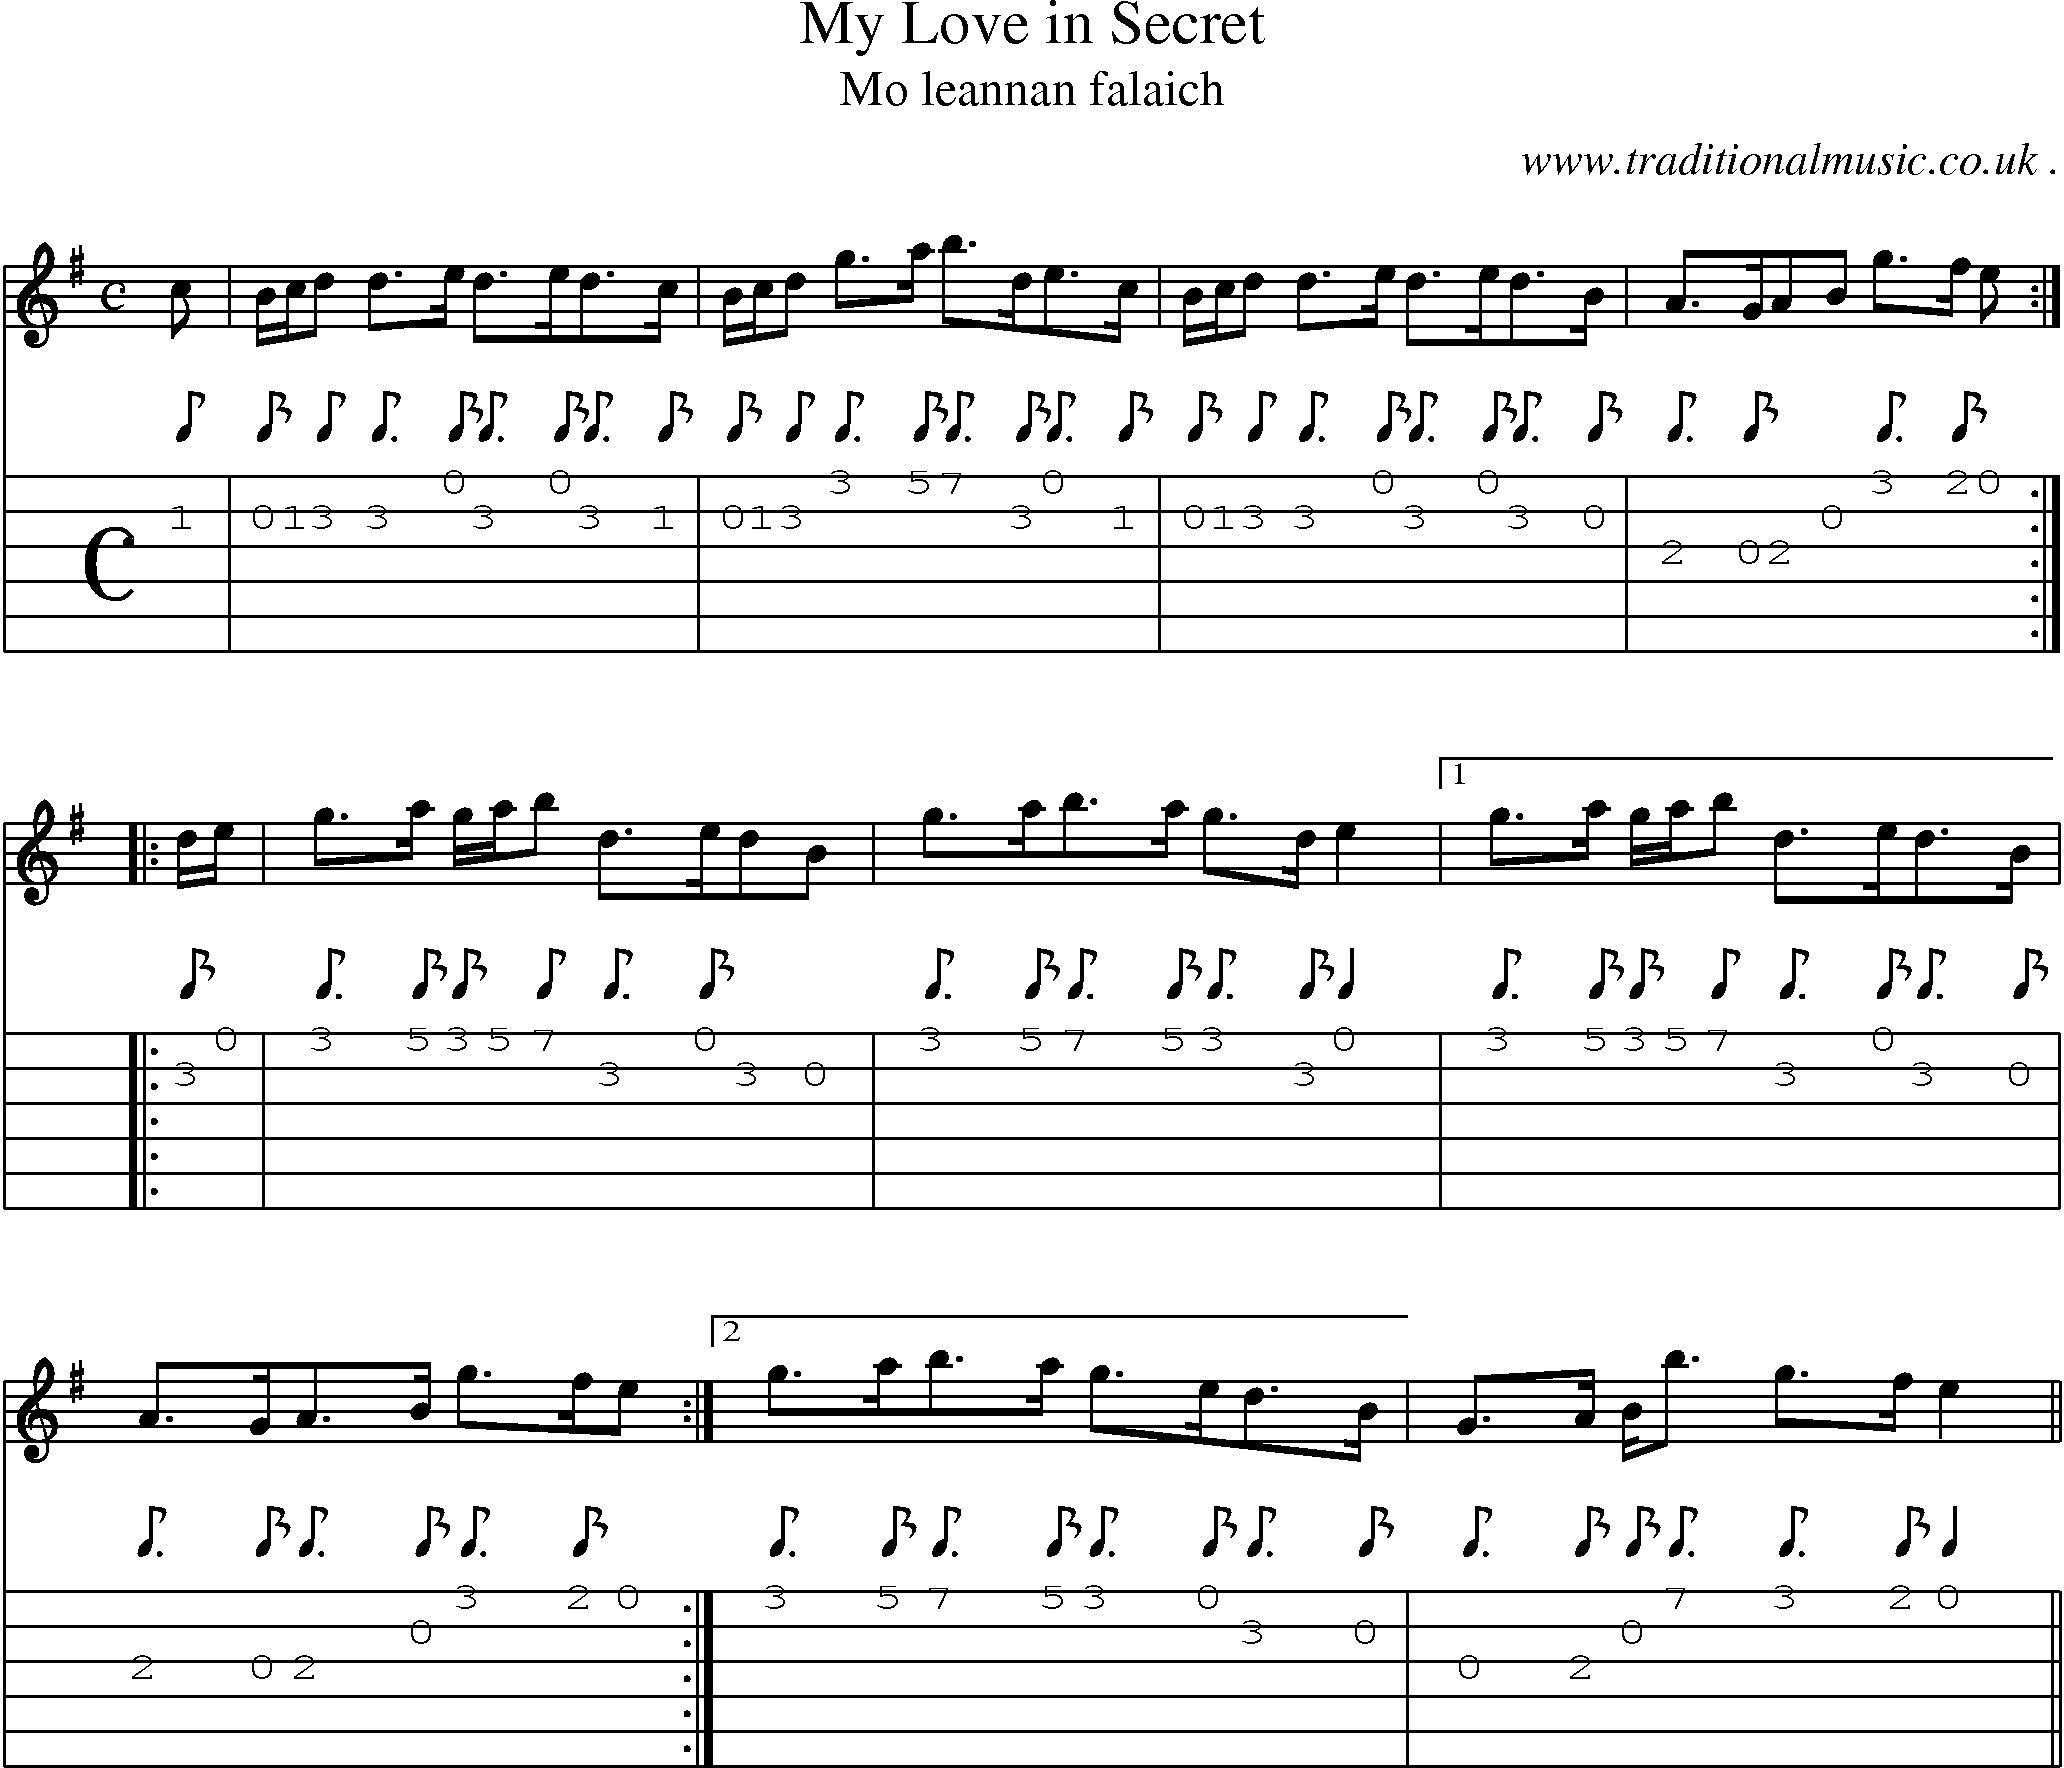 Sheet-music  score, Chords and Guitar Tabs for My Love In Secret